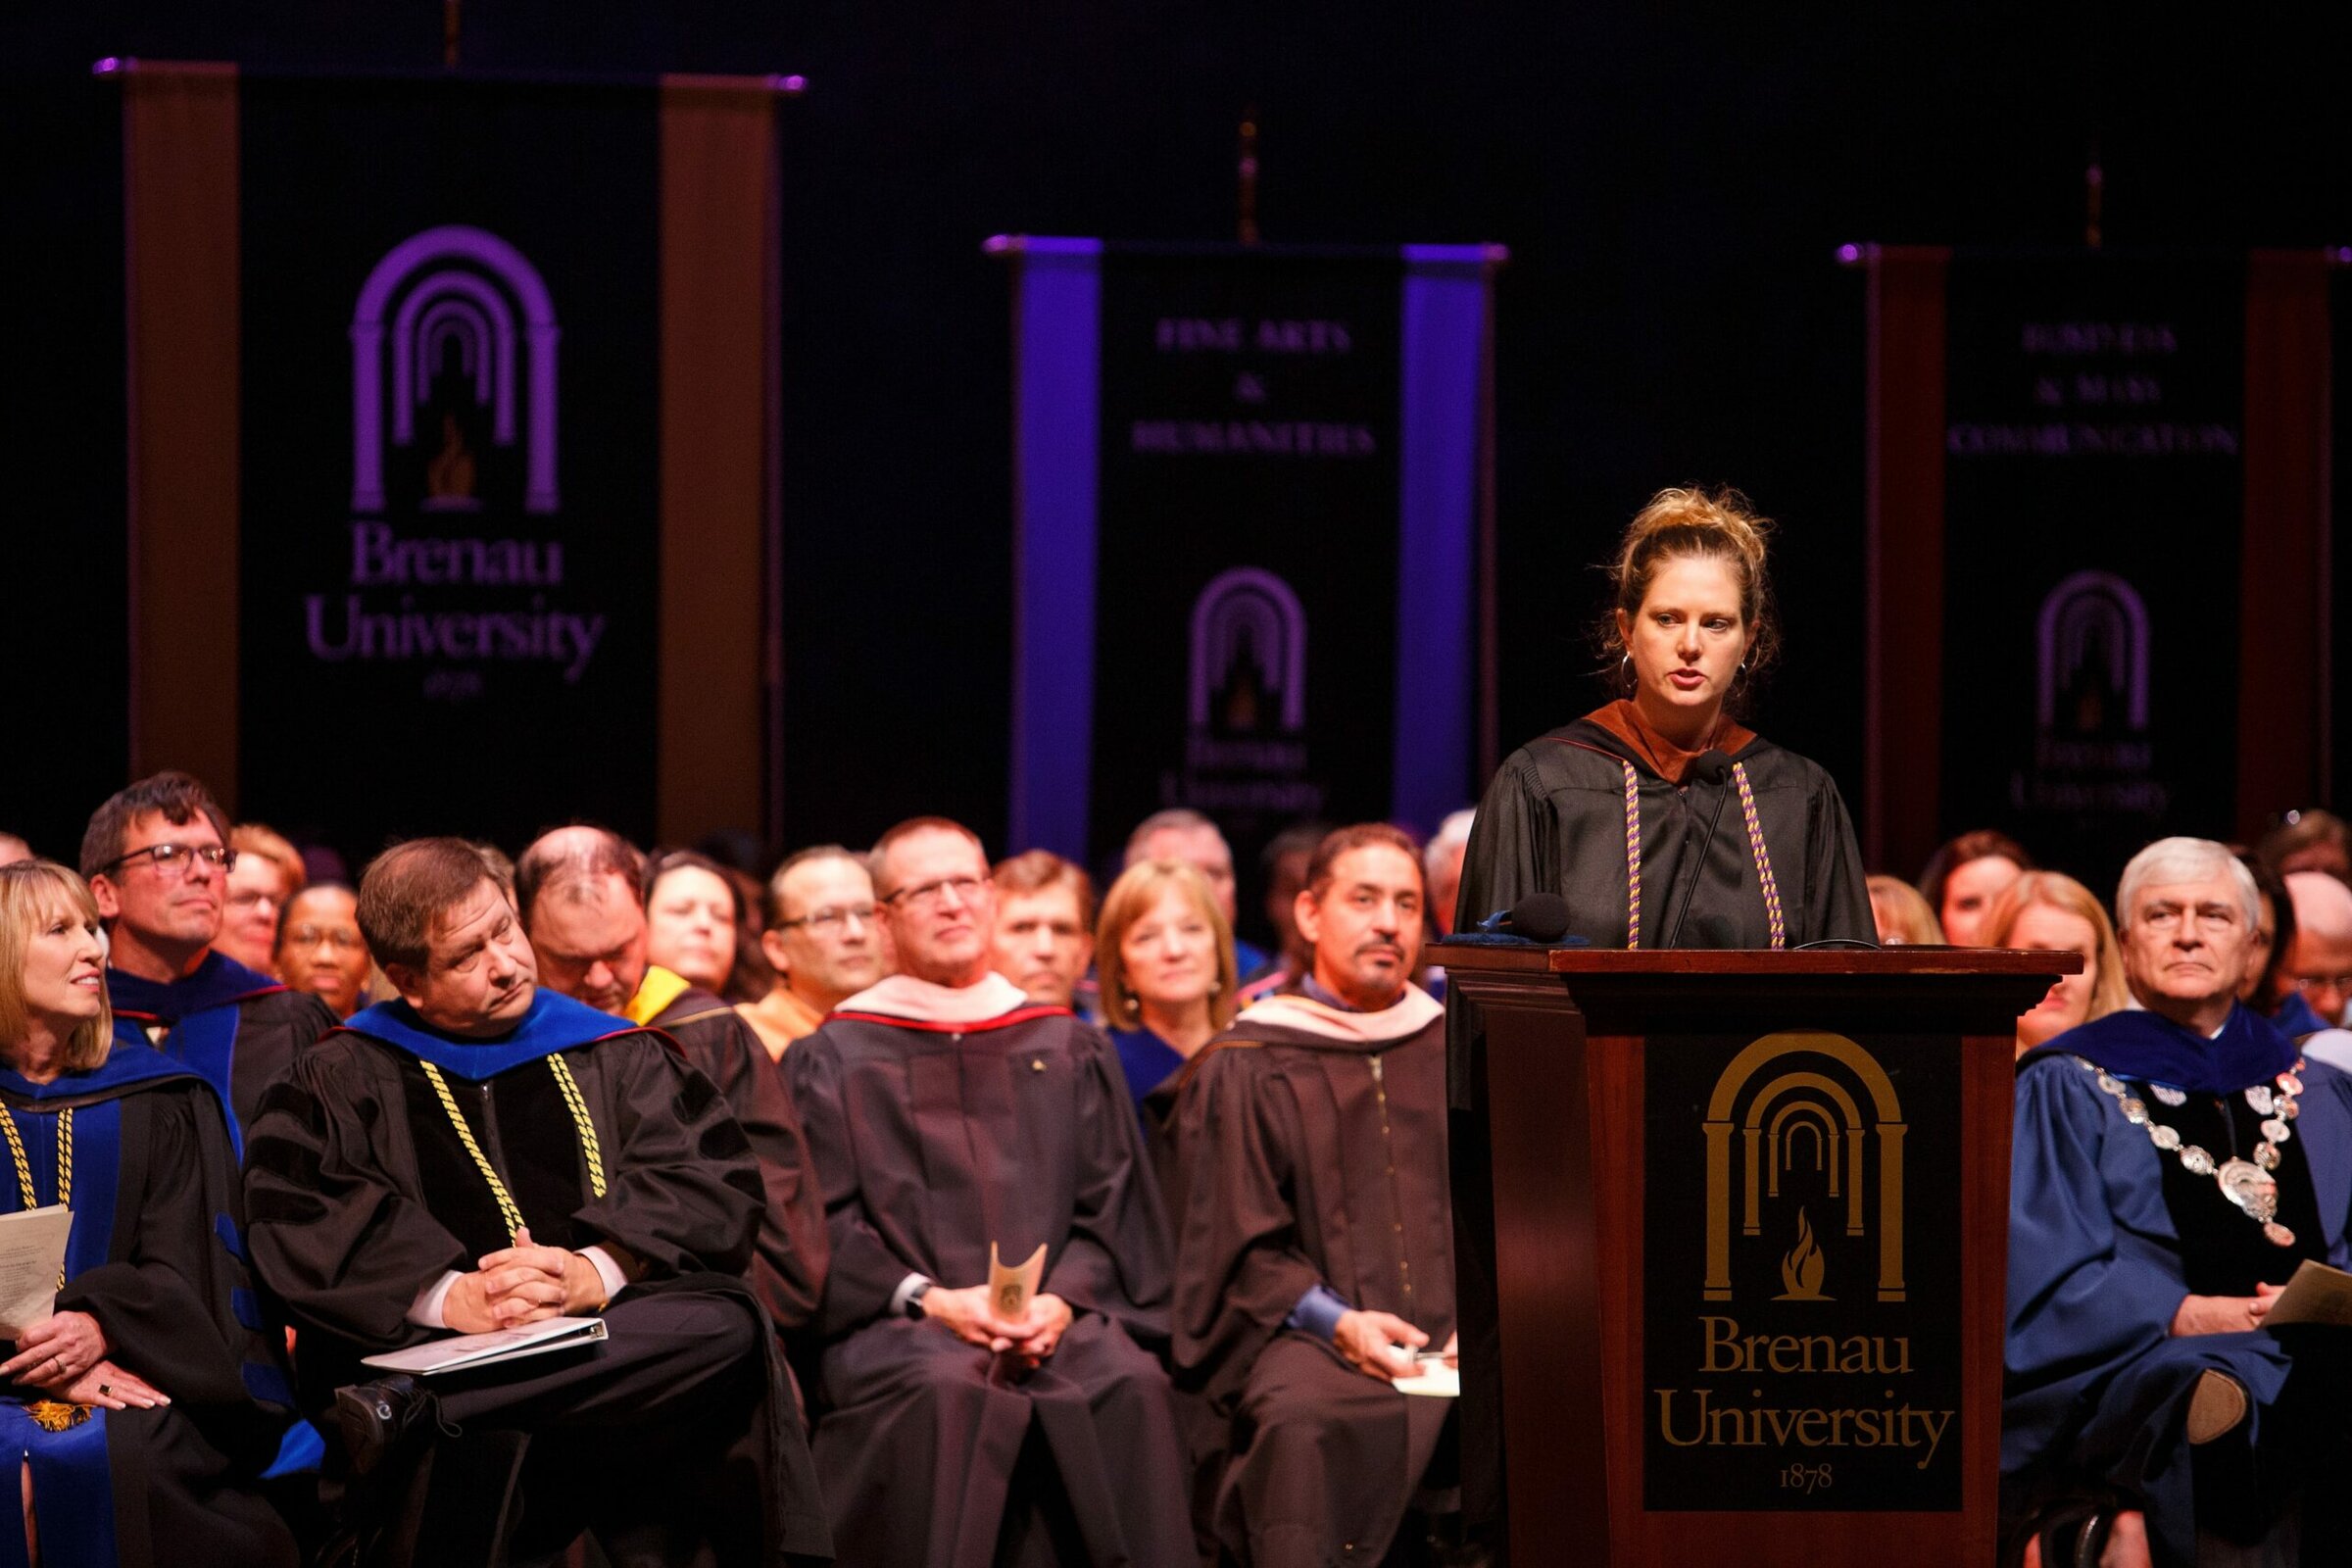 Chair and Associate Professor of Art & Design Claudia Wilburn gives a keynote speech at the 2018 Fall Formal Convocation in Pearce Auditorium. (Photos by AJ Reynolds/Brenau University)